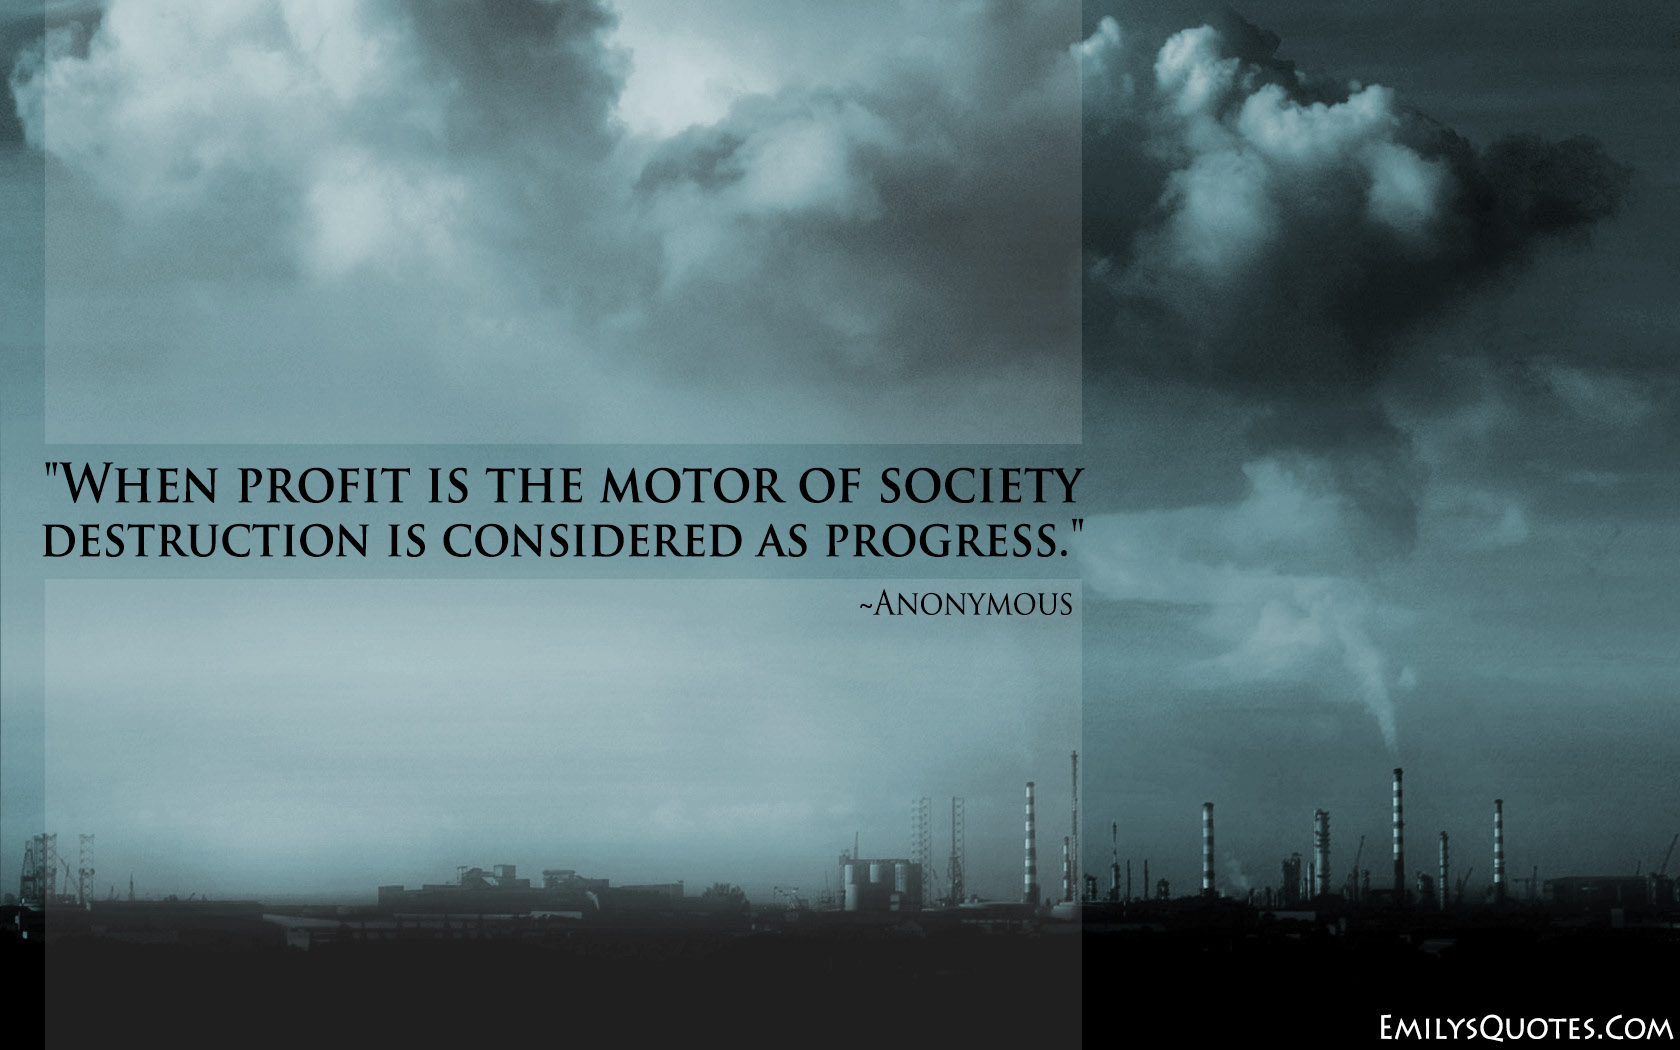 When profit is the motor of society destruction is considered as progress